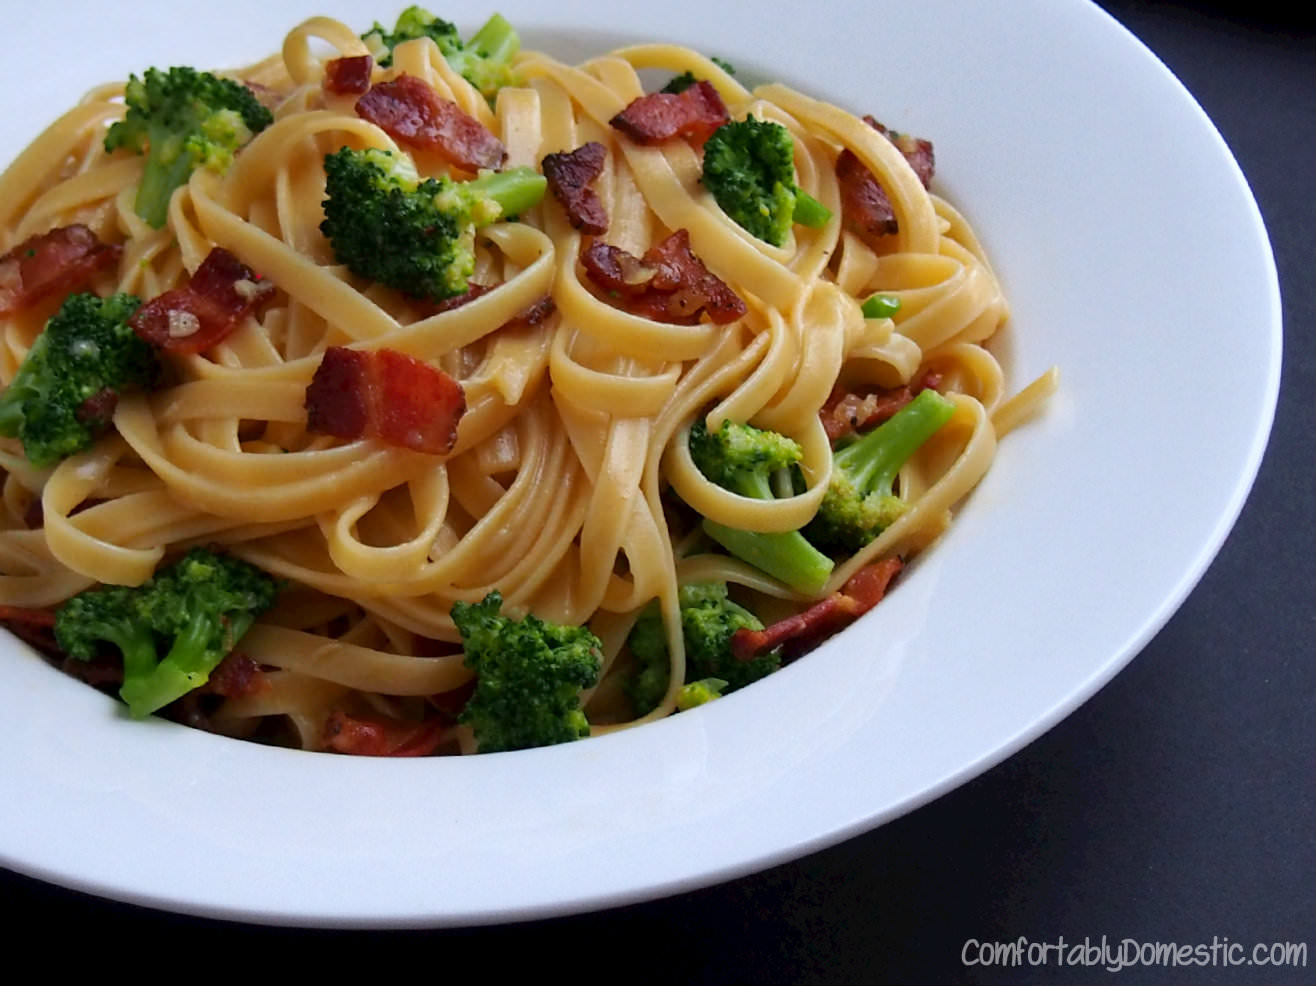 Broccoli bacon pasta carbonara is an inexpensive yet impressive meal, made with fresh broccoli, thick-cut pepper bacon, eggs, and plenty of cheese. | ComfortablyDomestic.com